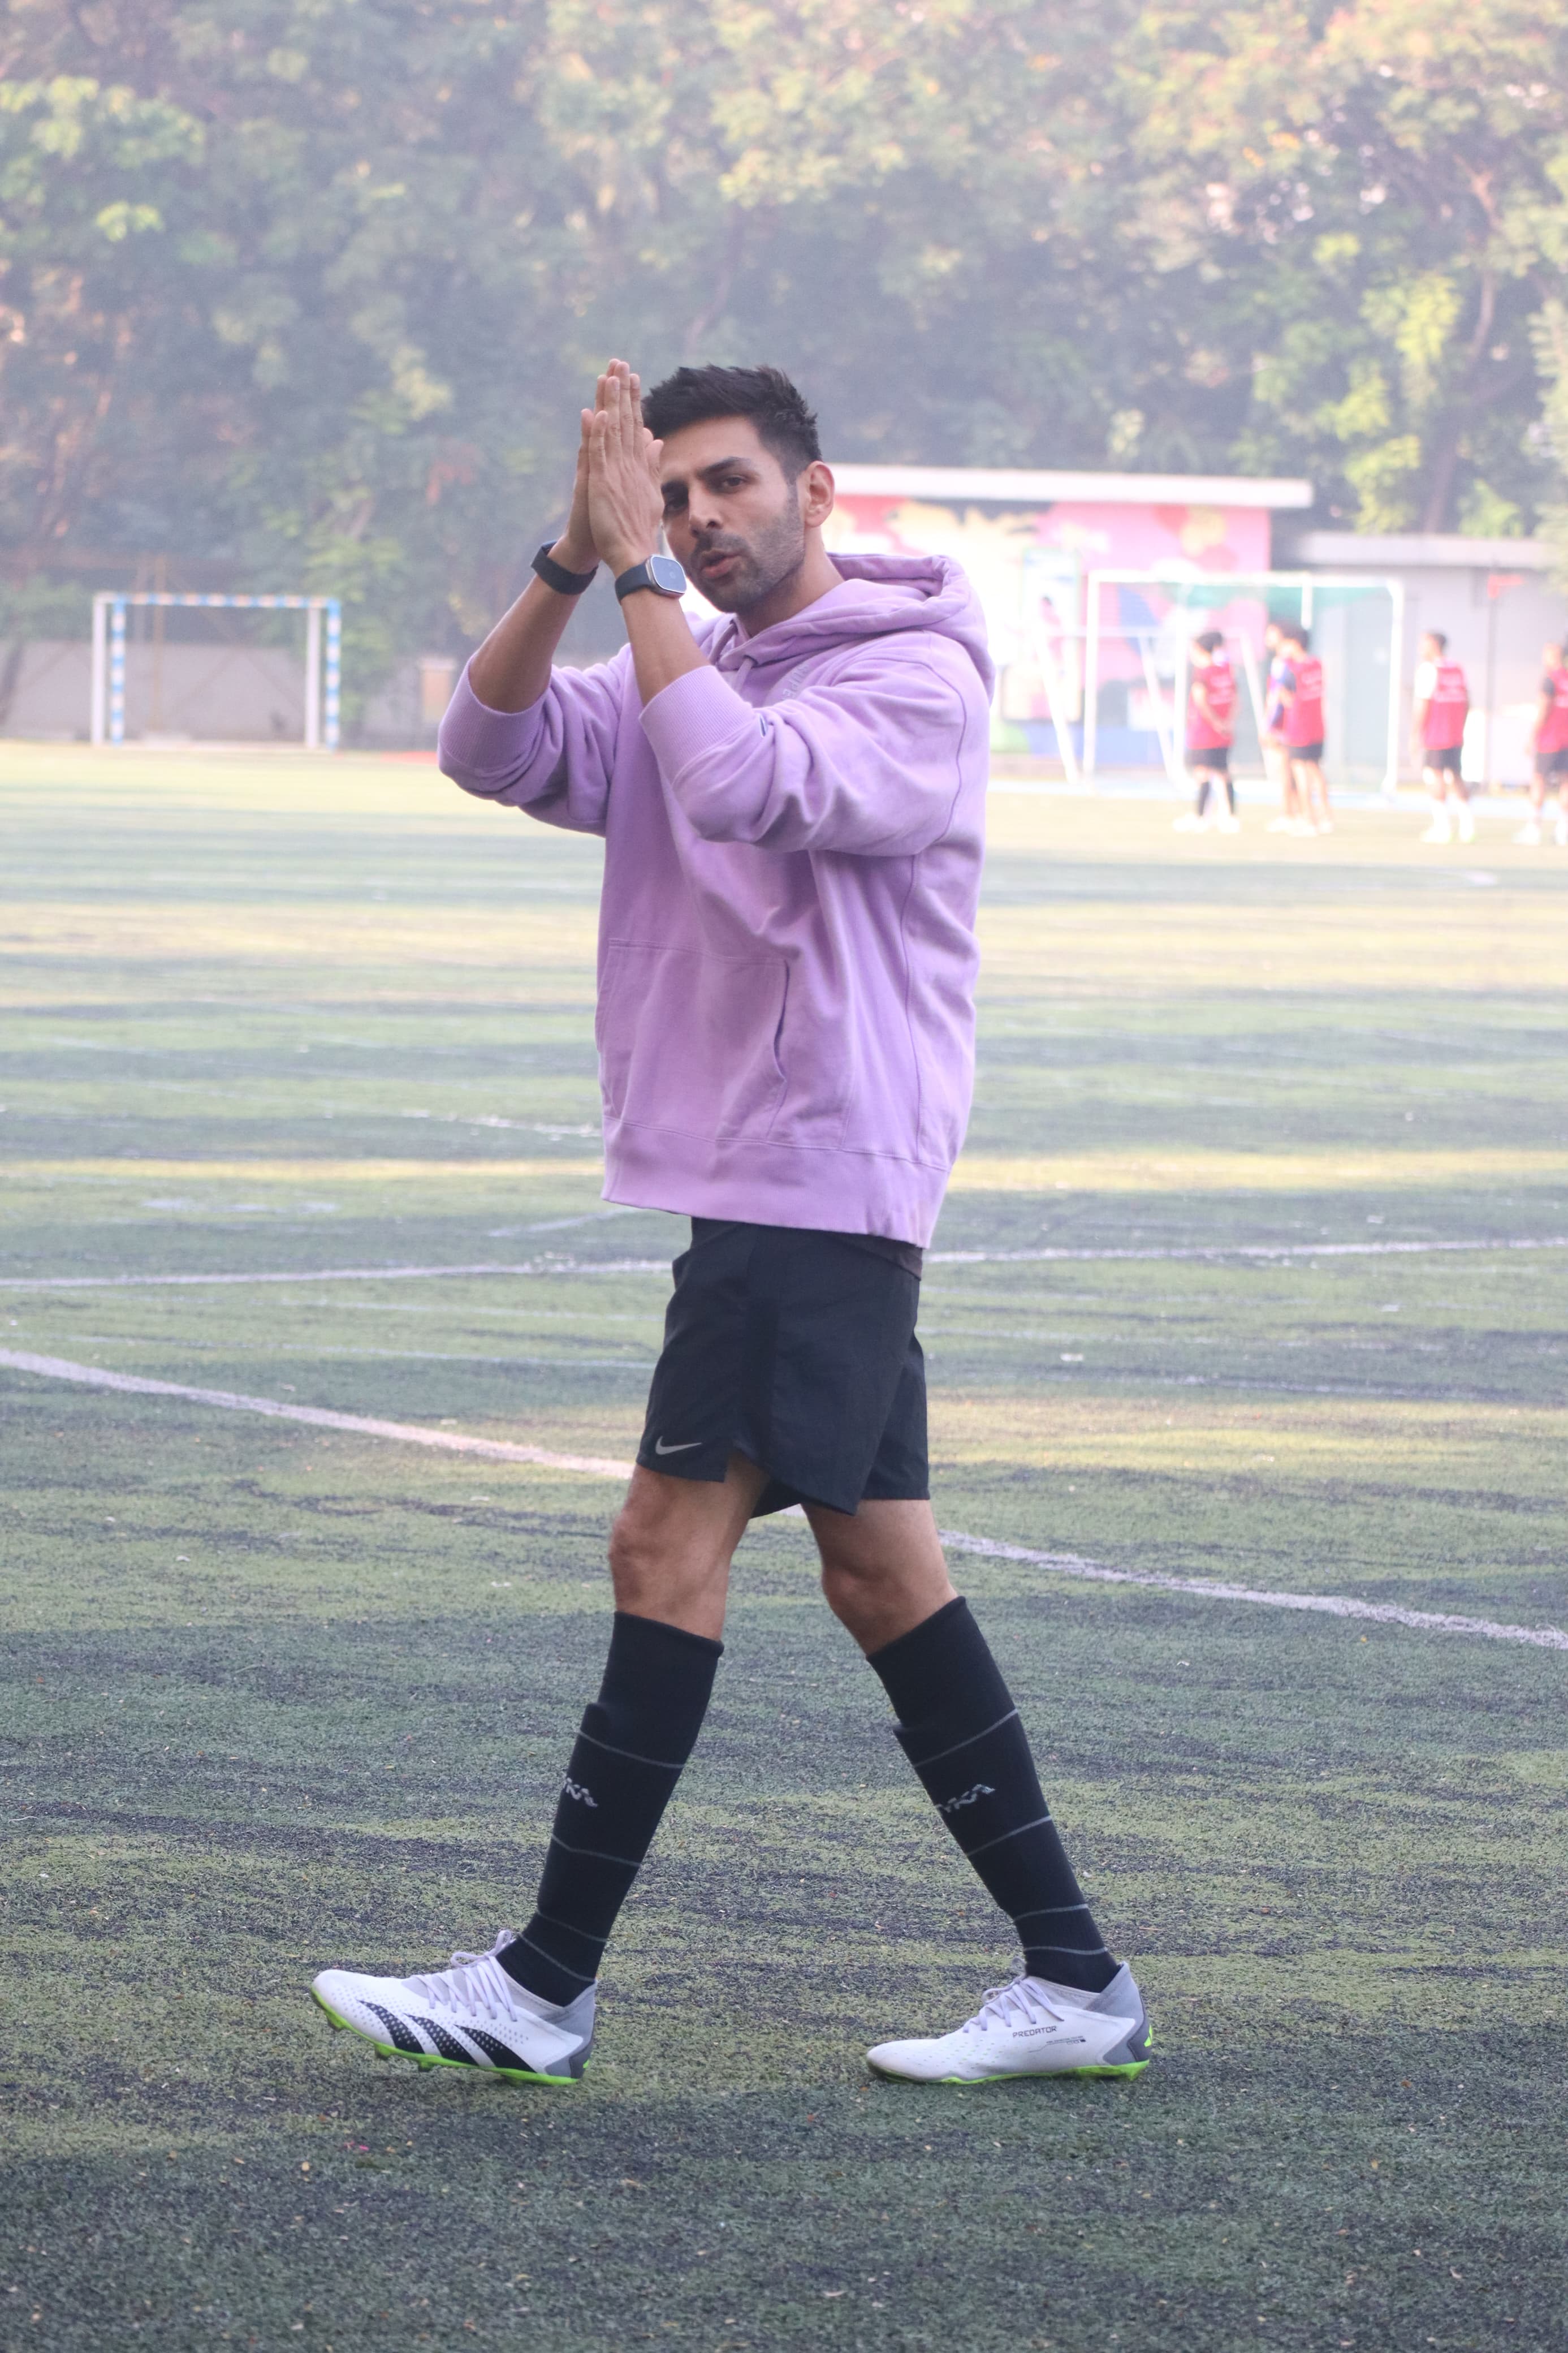 Kartik Aaryan got papped as he went for a football practice session